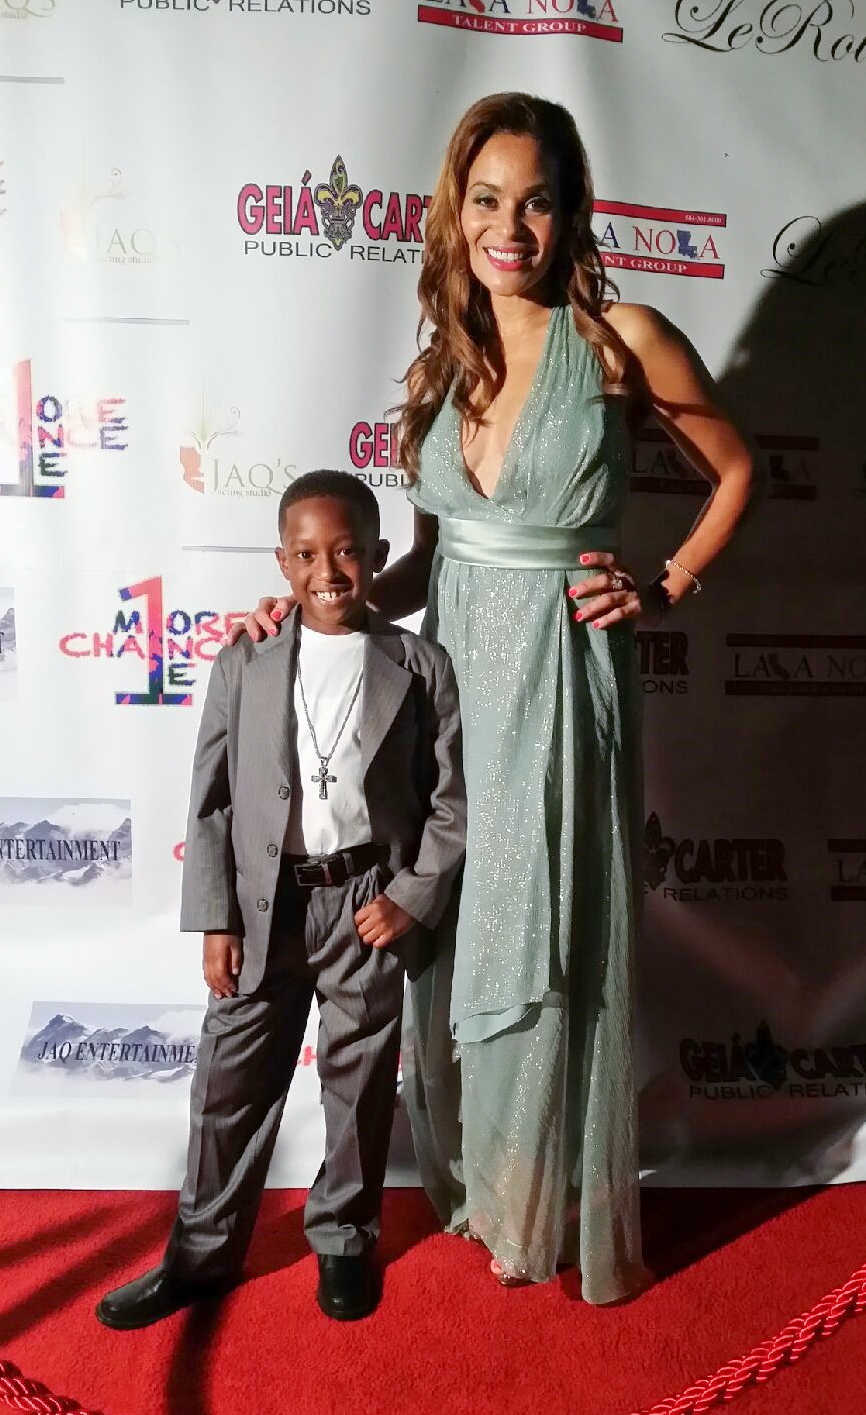 Kaden W. Lewis and Jaqueline Fleming at the Premier of One More Chance. 10/19/13